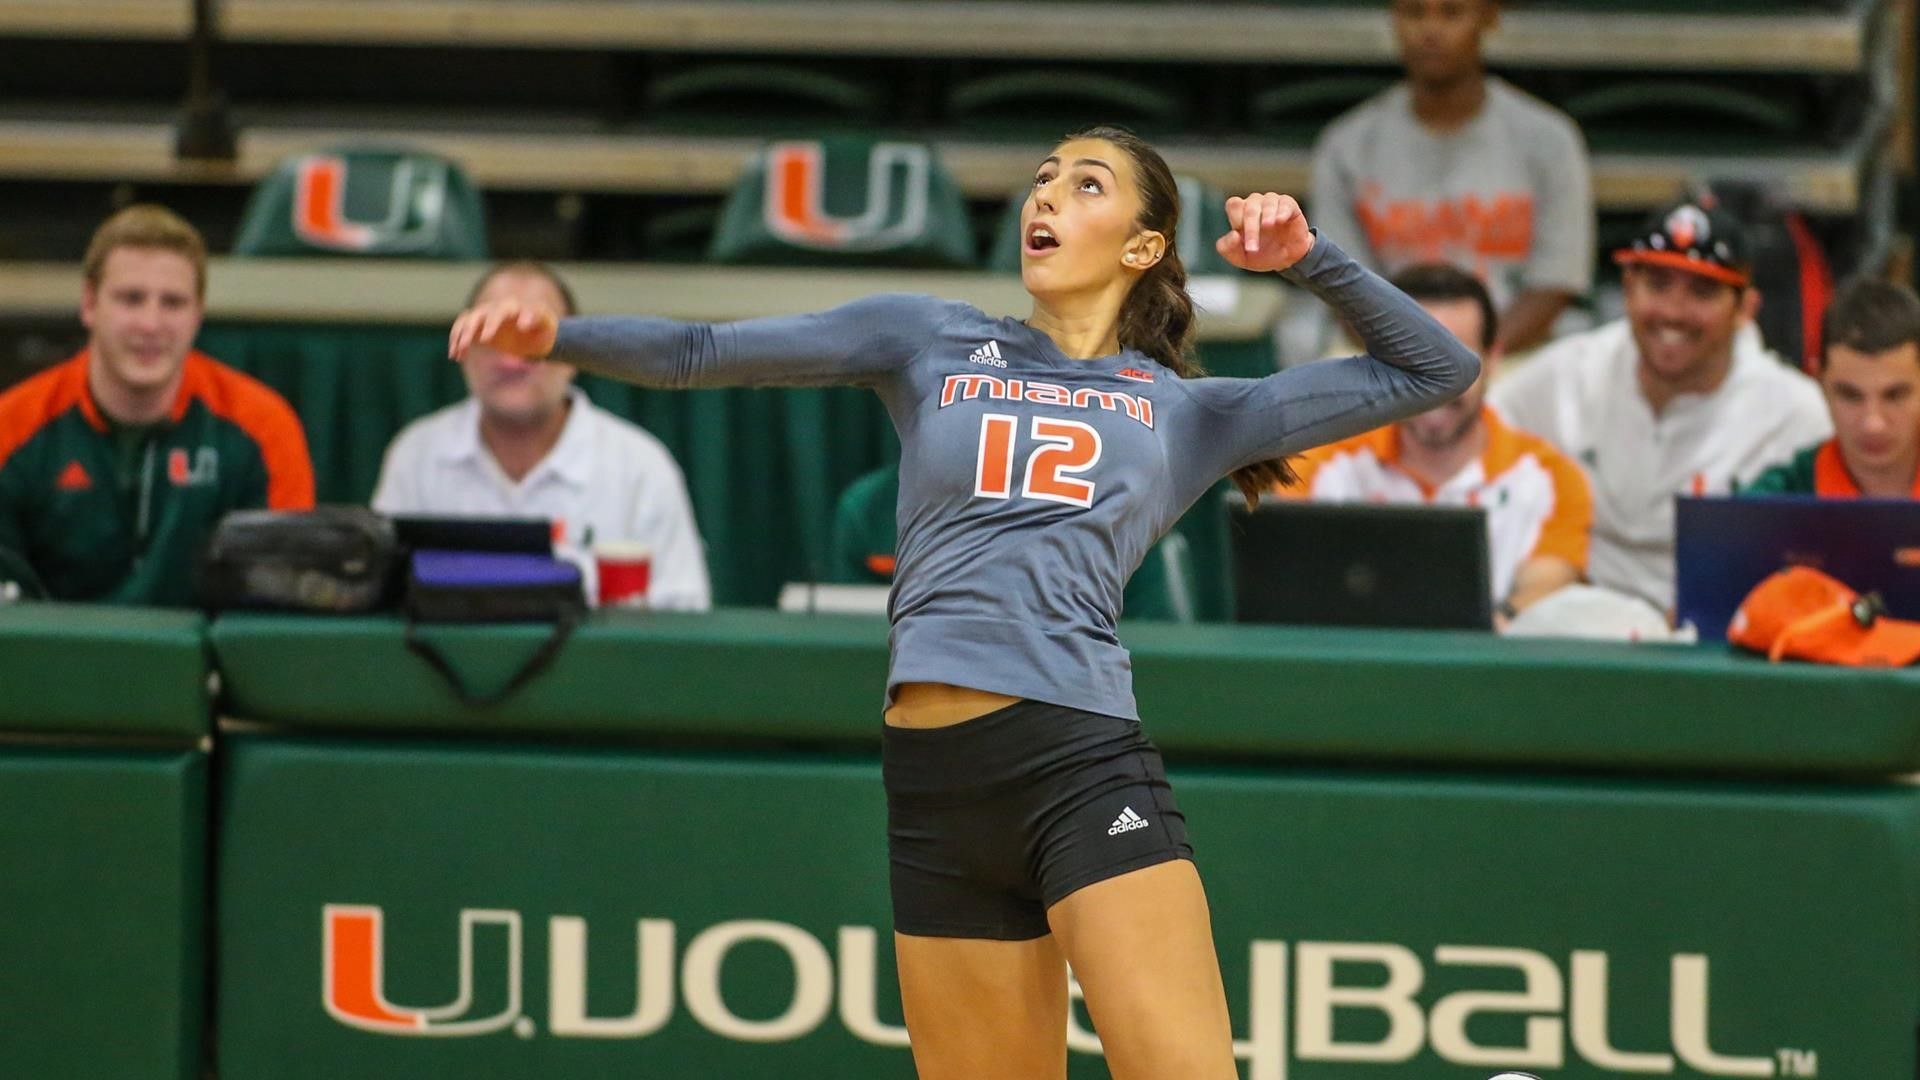 Canes Come Out on Top in Season Opener